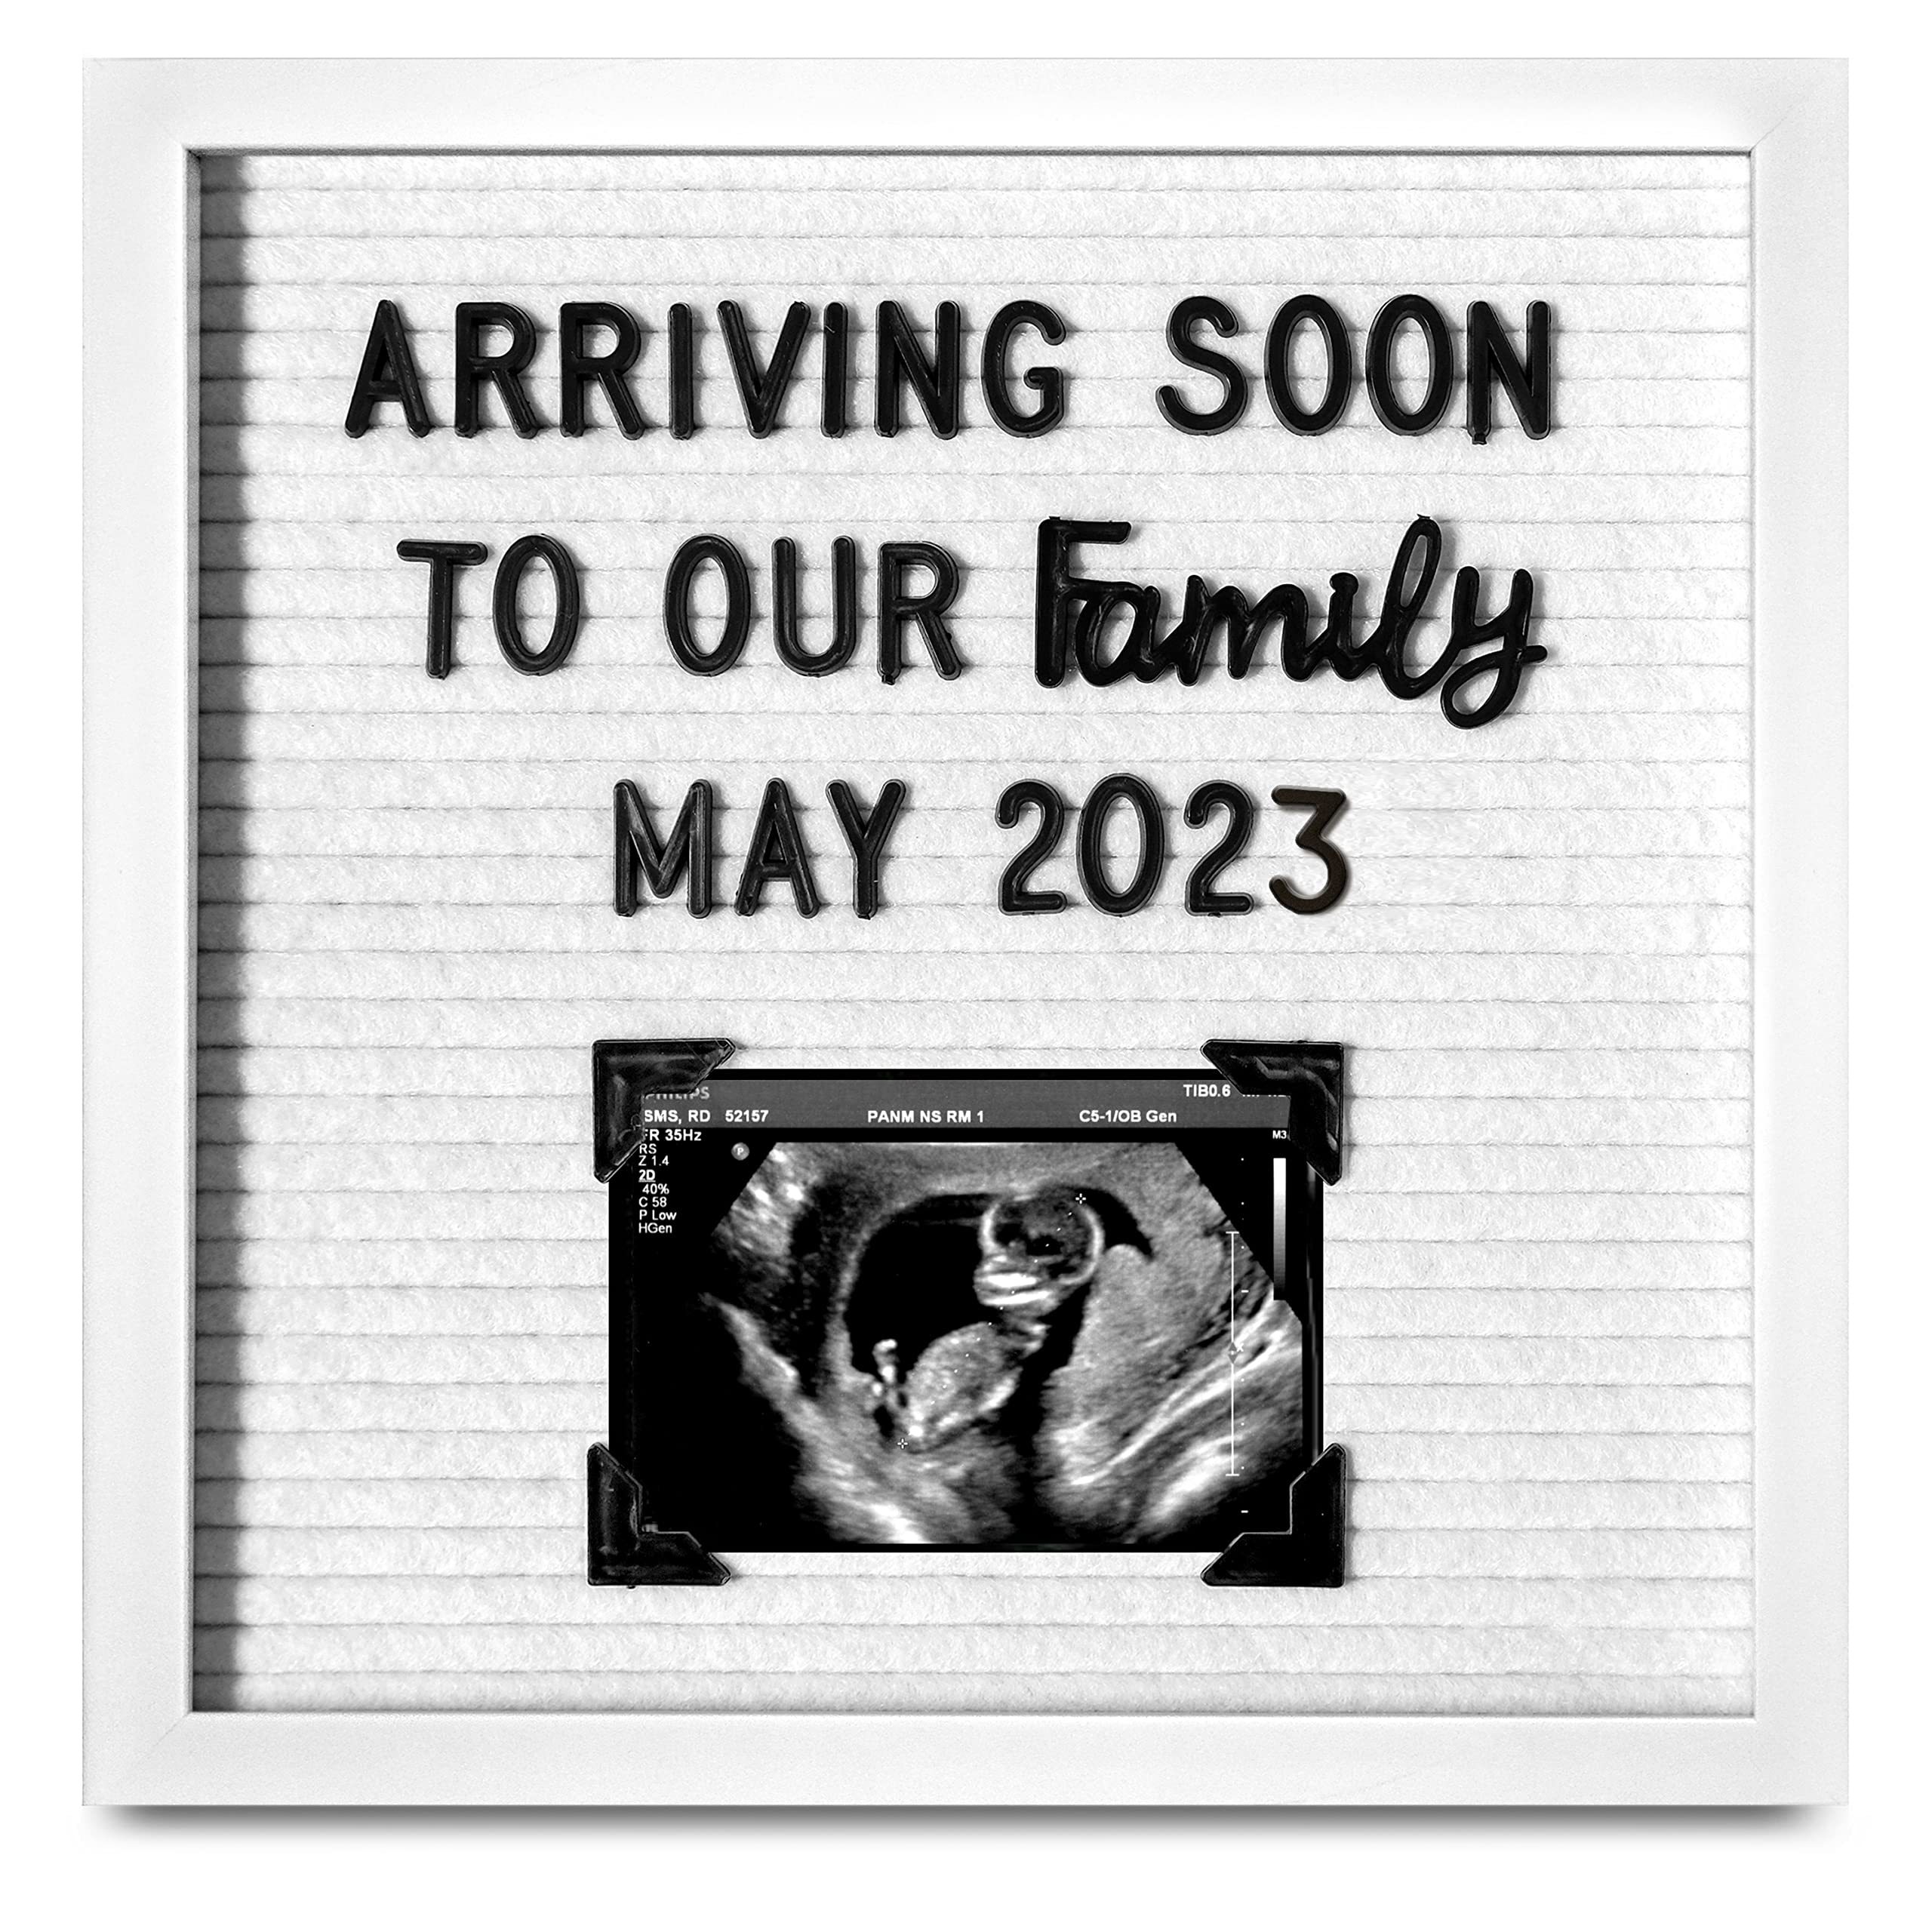 MAINEVENT 10x10 Inch All White Felt Letter Board, Precut Changeable Letter Board Baby Announcement Board Letter Baby Letter Board Stand Le